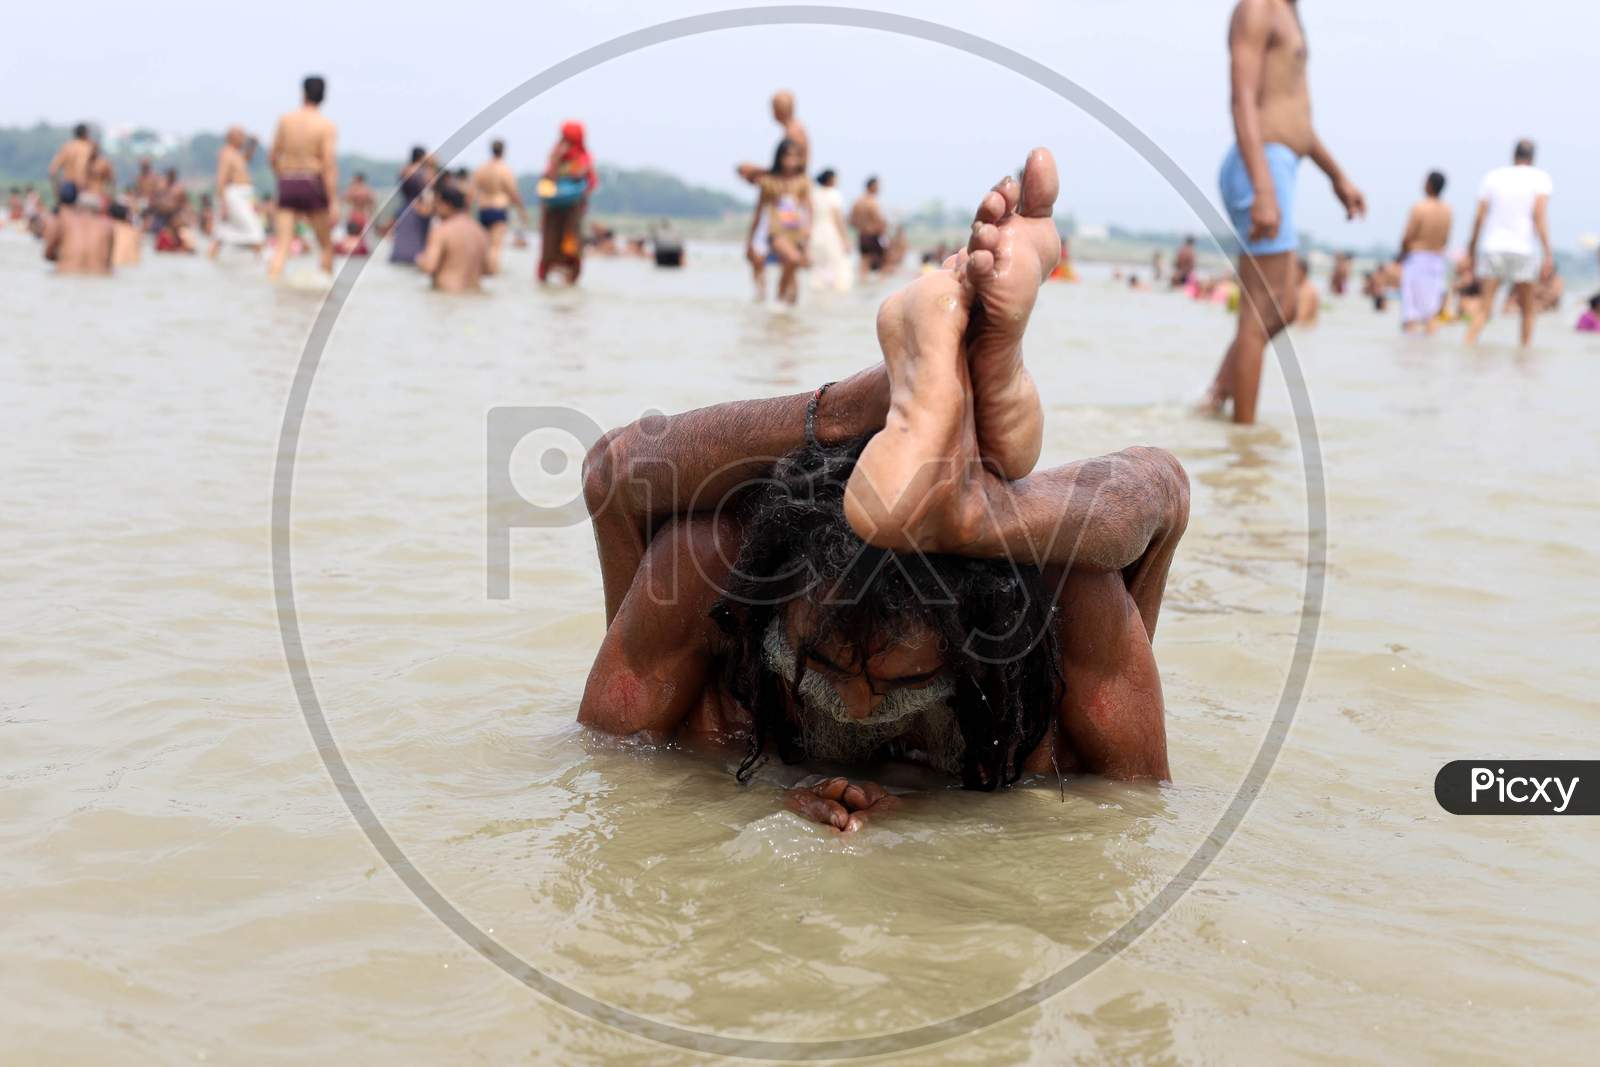 A Sadhu Performs Yoga In The River Ganga  On The Occasion Of International Yoga Day In Prayagraj, June 21, 2020.